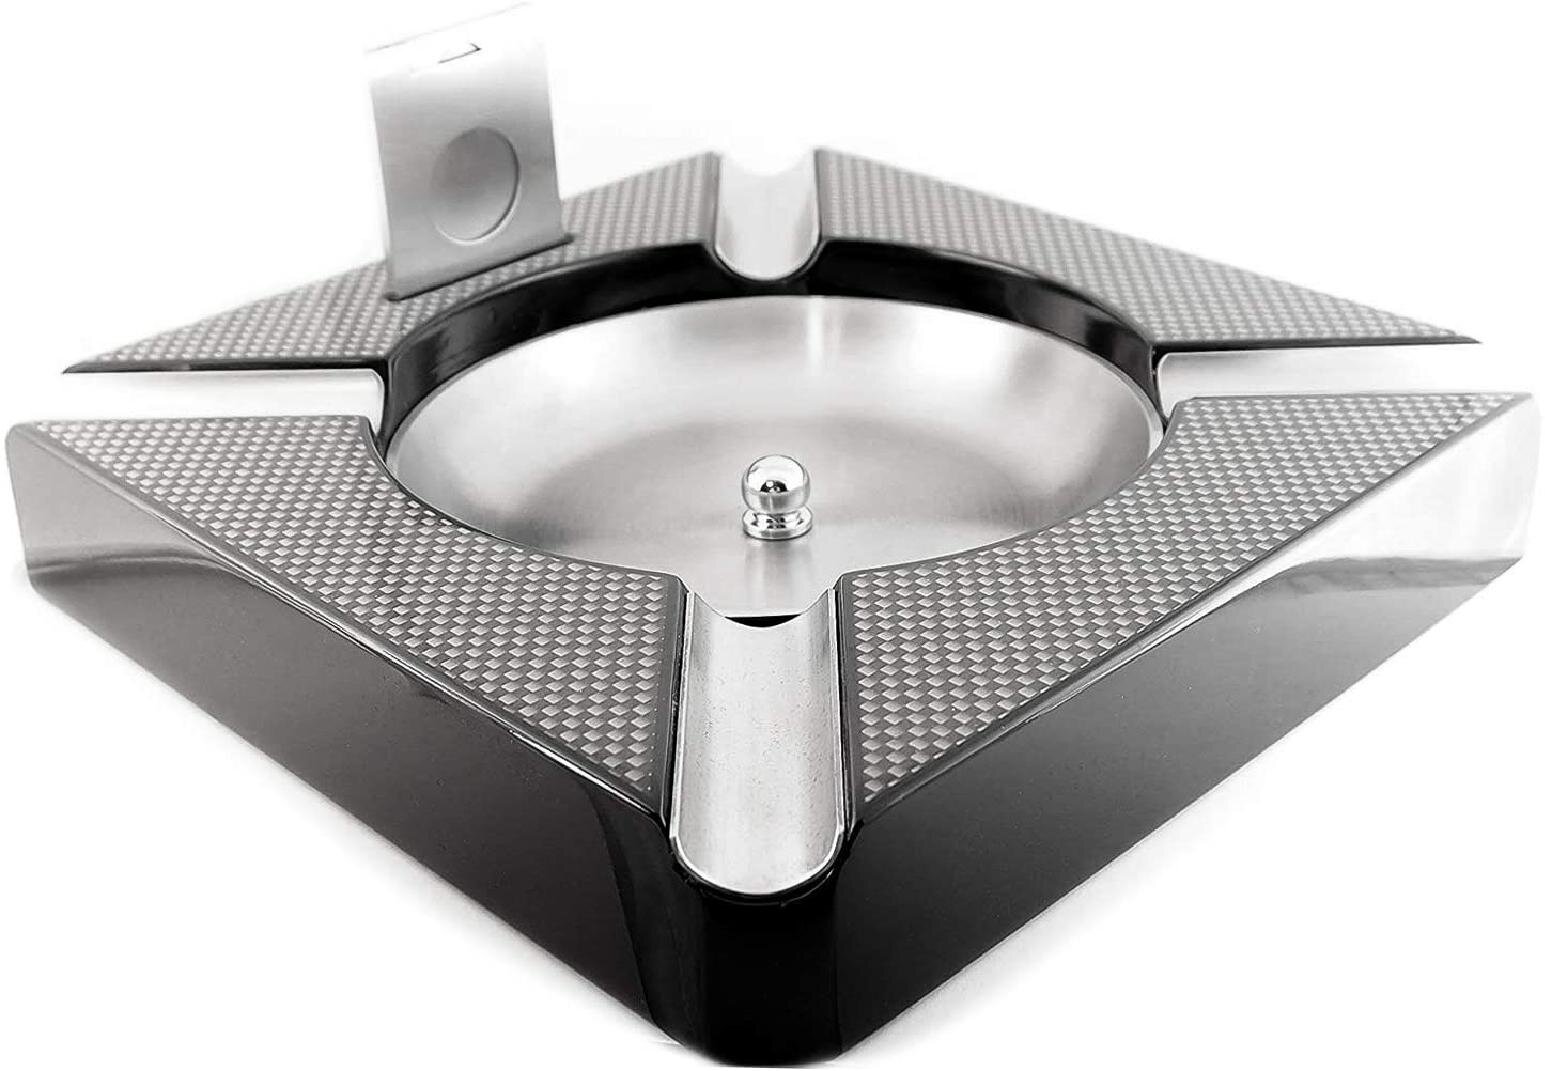 STAINLESS STEEL FITS OVER DROP IN FREE SHIPPING* DRINK HOLDER ASHTRAY SCREEN 